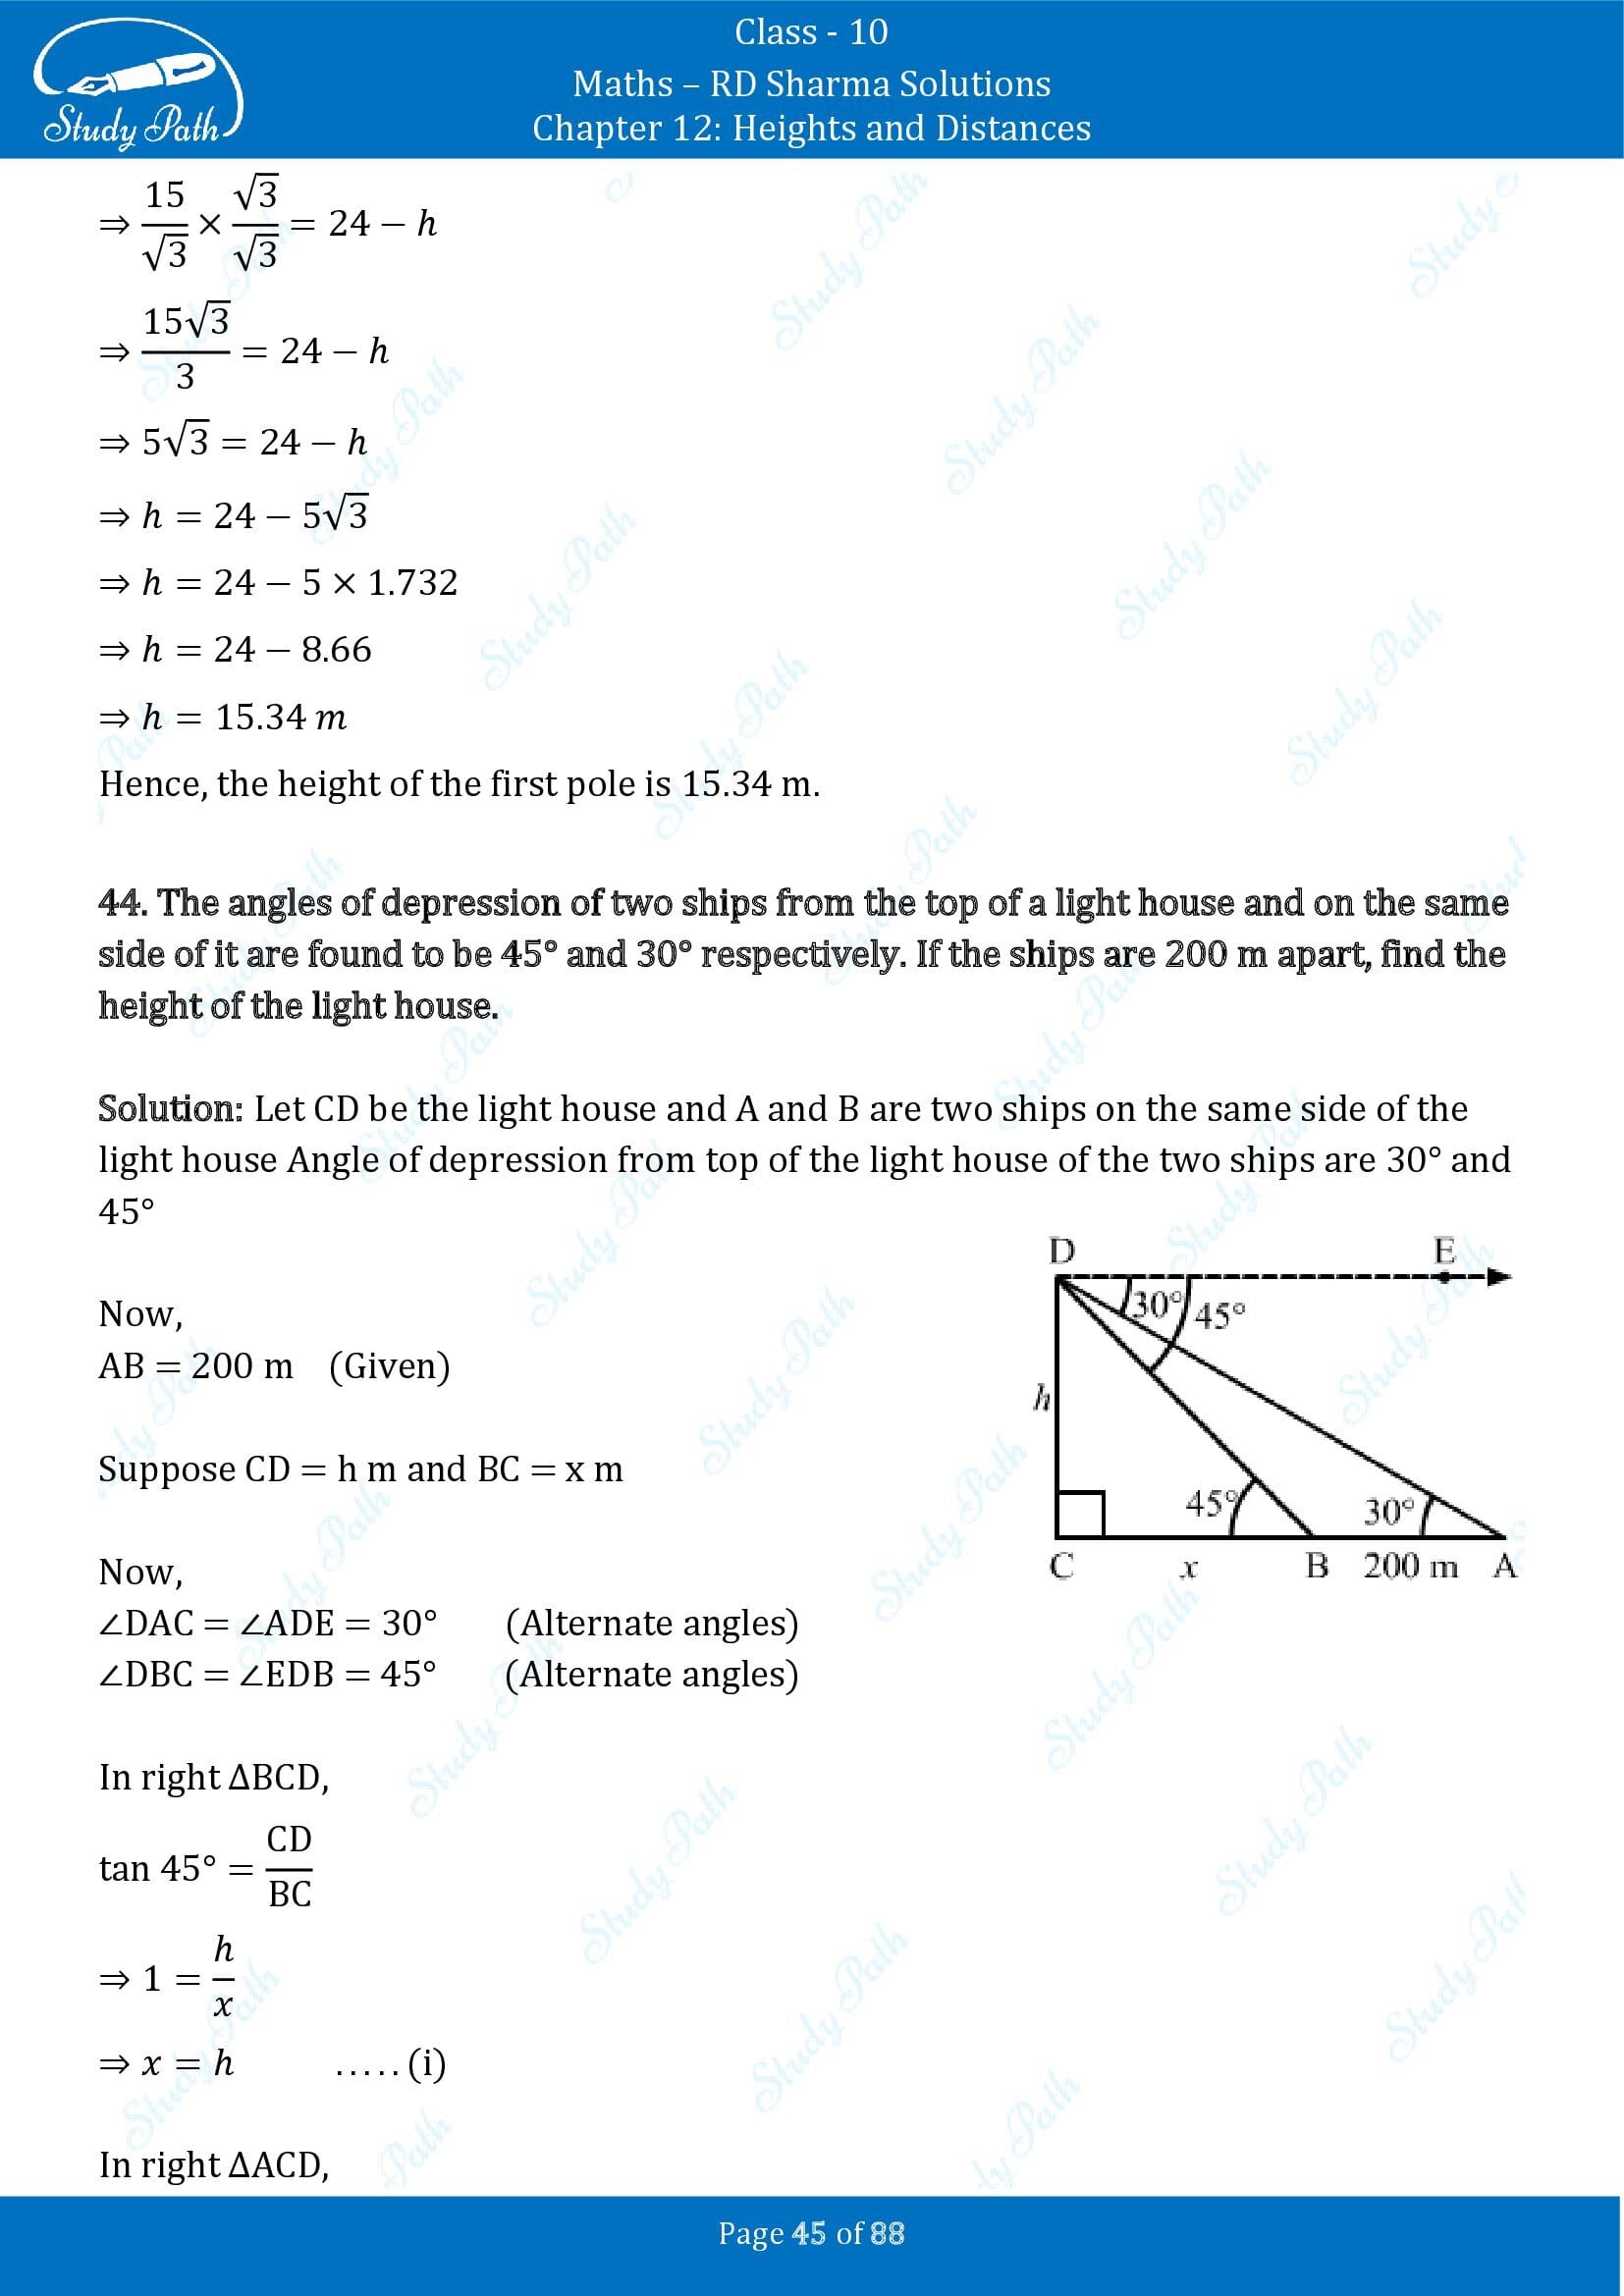 RD Sharma Solutions Class 10 Chapter 12 Heights and Distances Exercise 12.1 00045